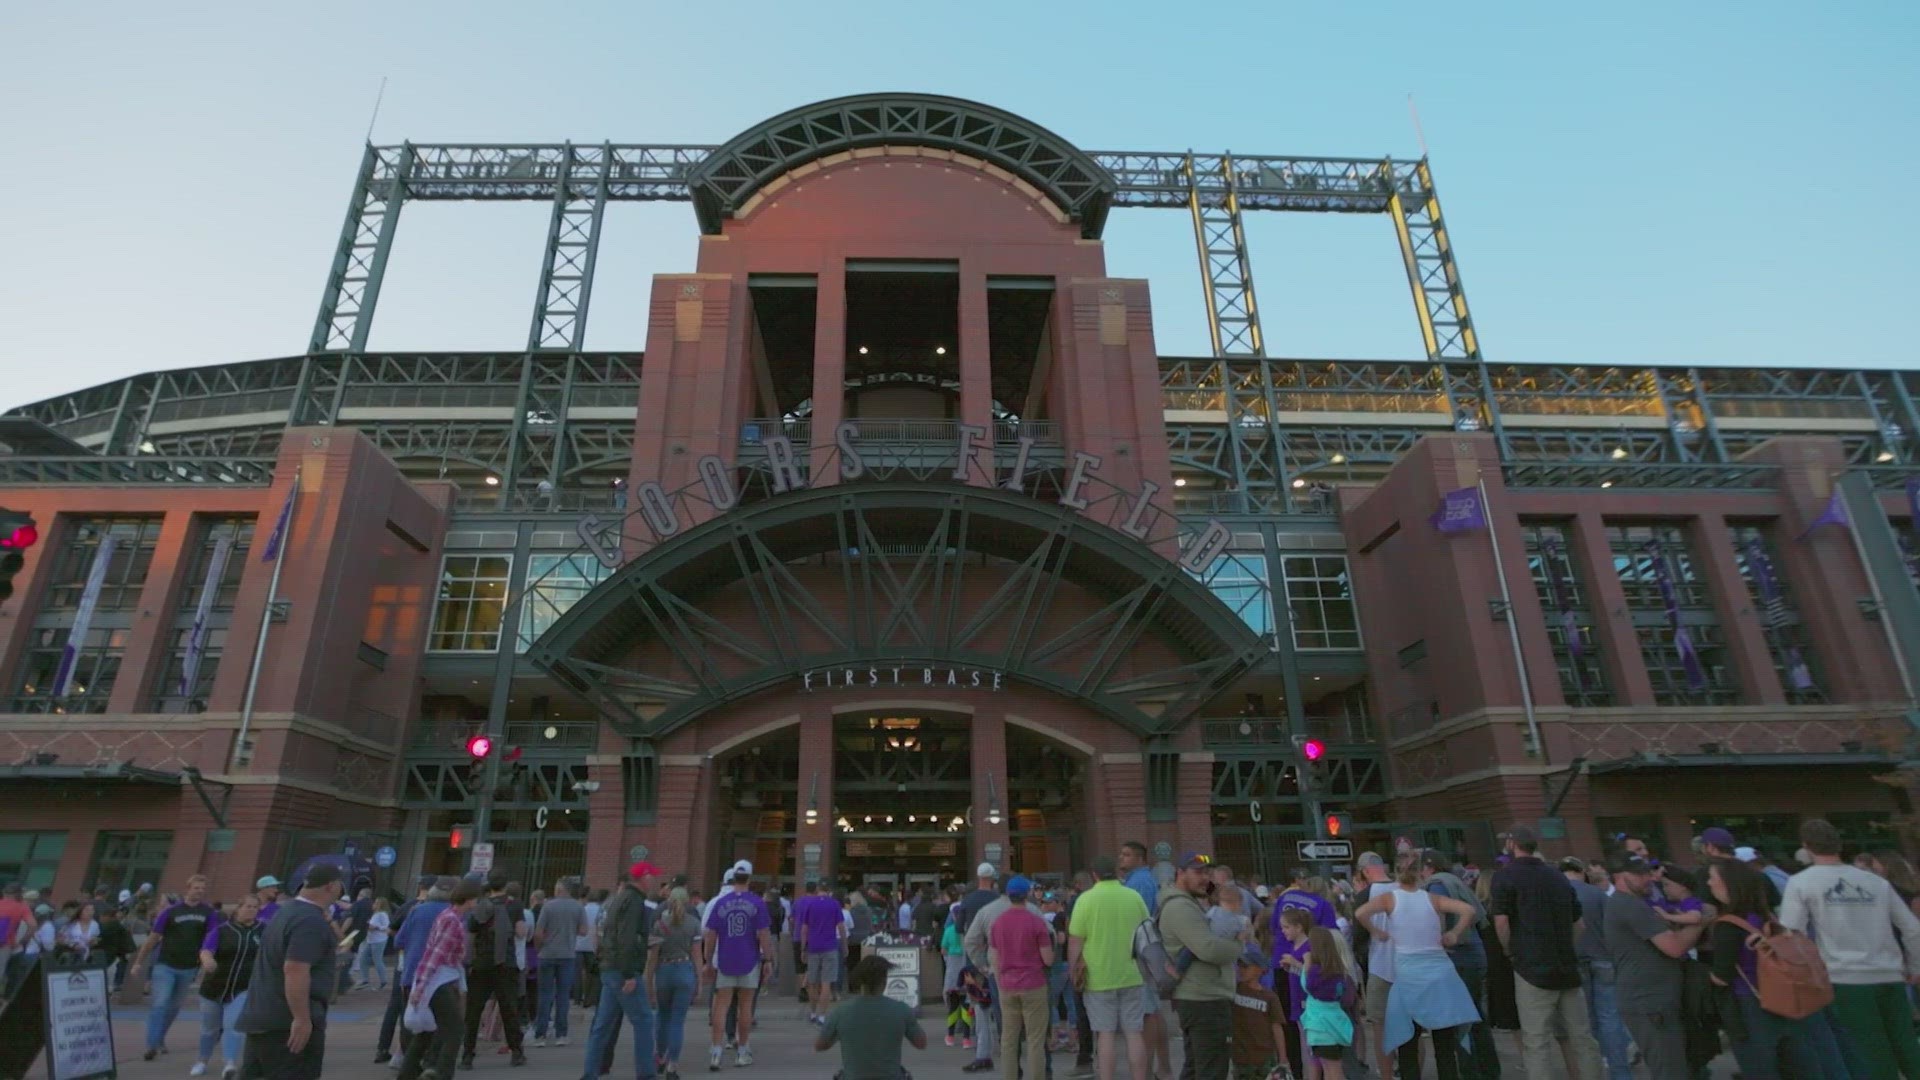 A baseball-loving community unites to make its MLB dream come true and hits a home run with the 1993 arrival of the Colorado Rockies.